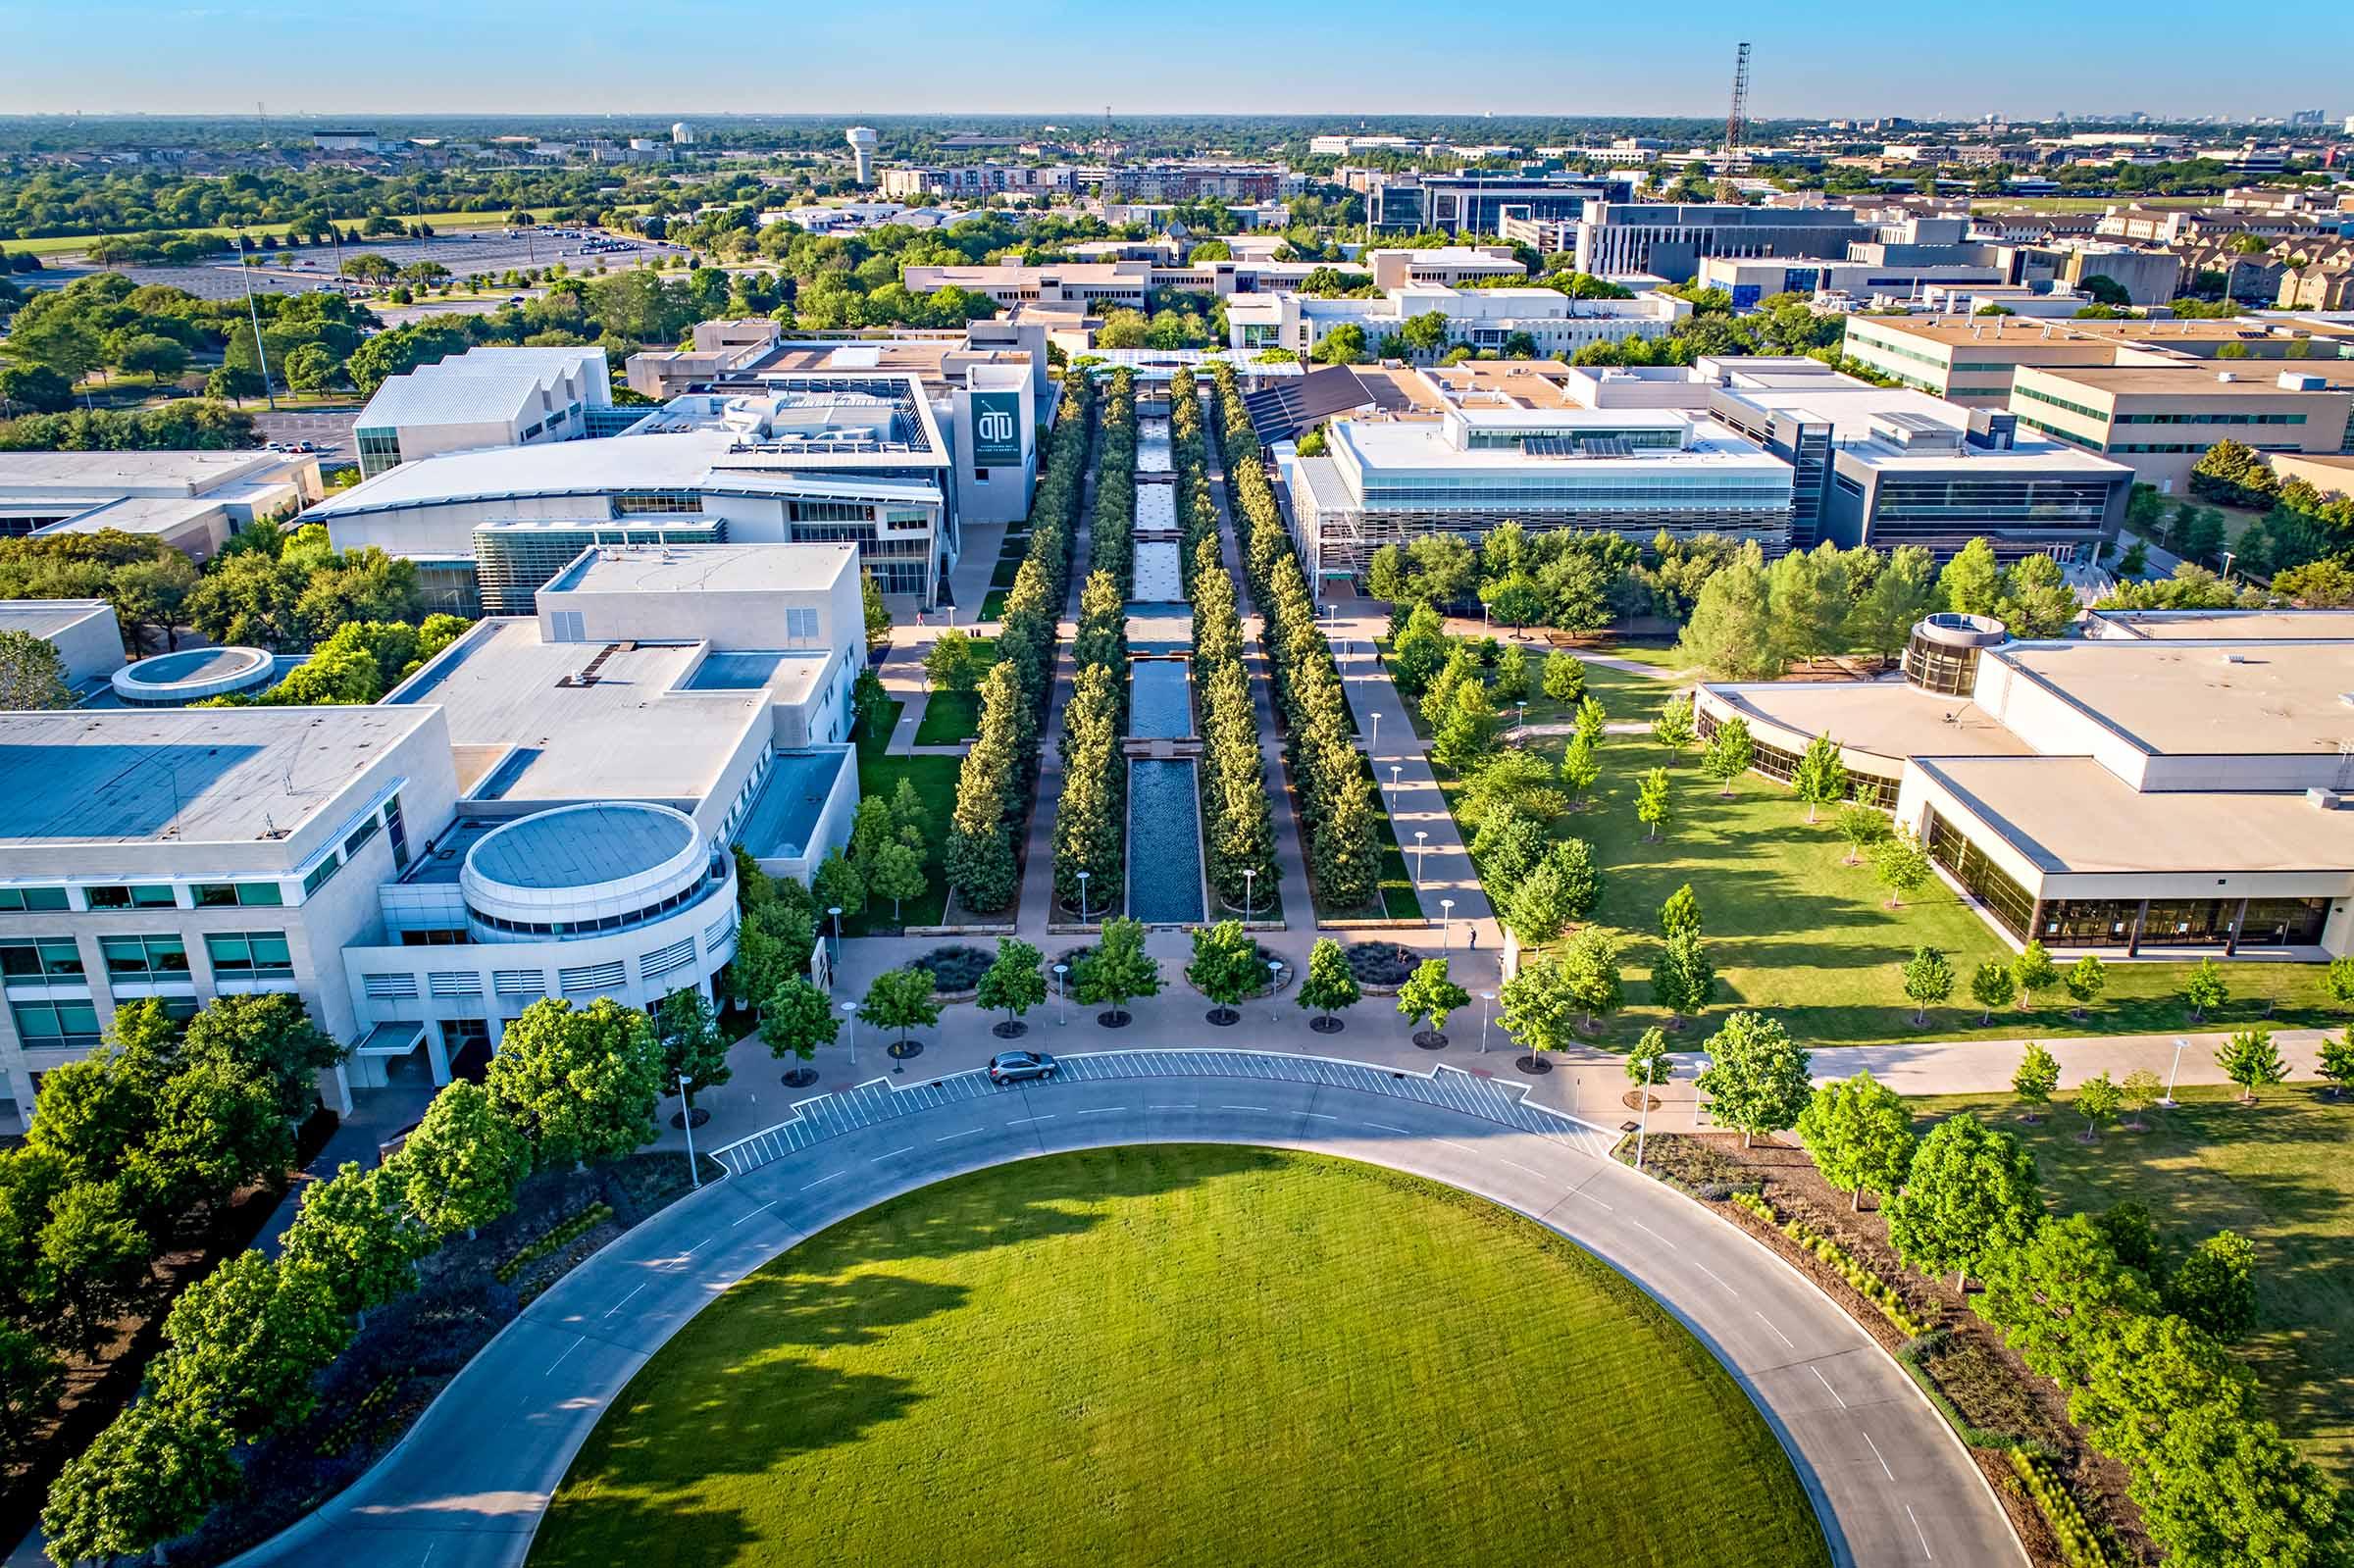 drone shot of UTD campus mall